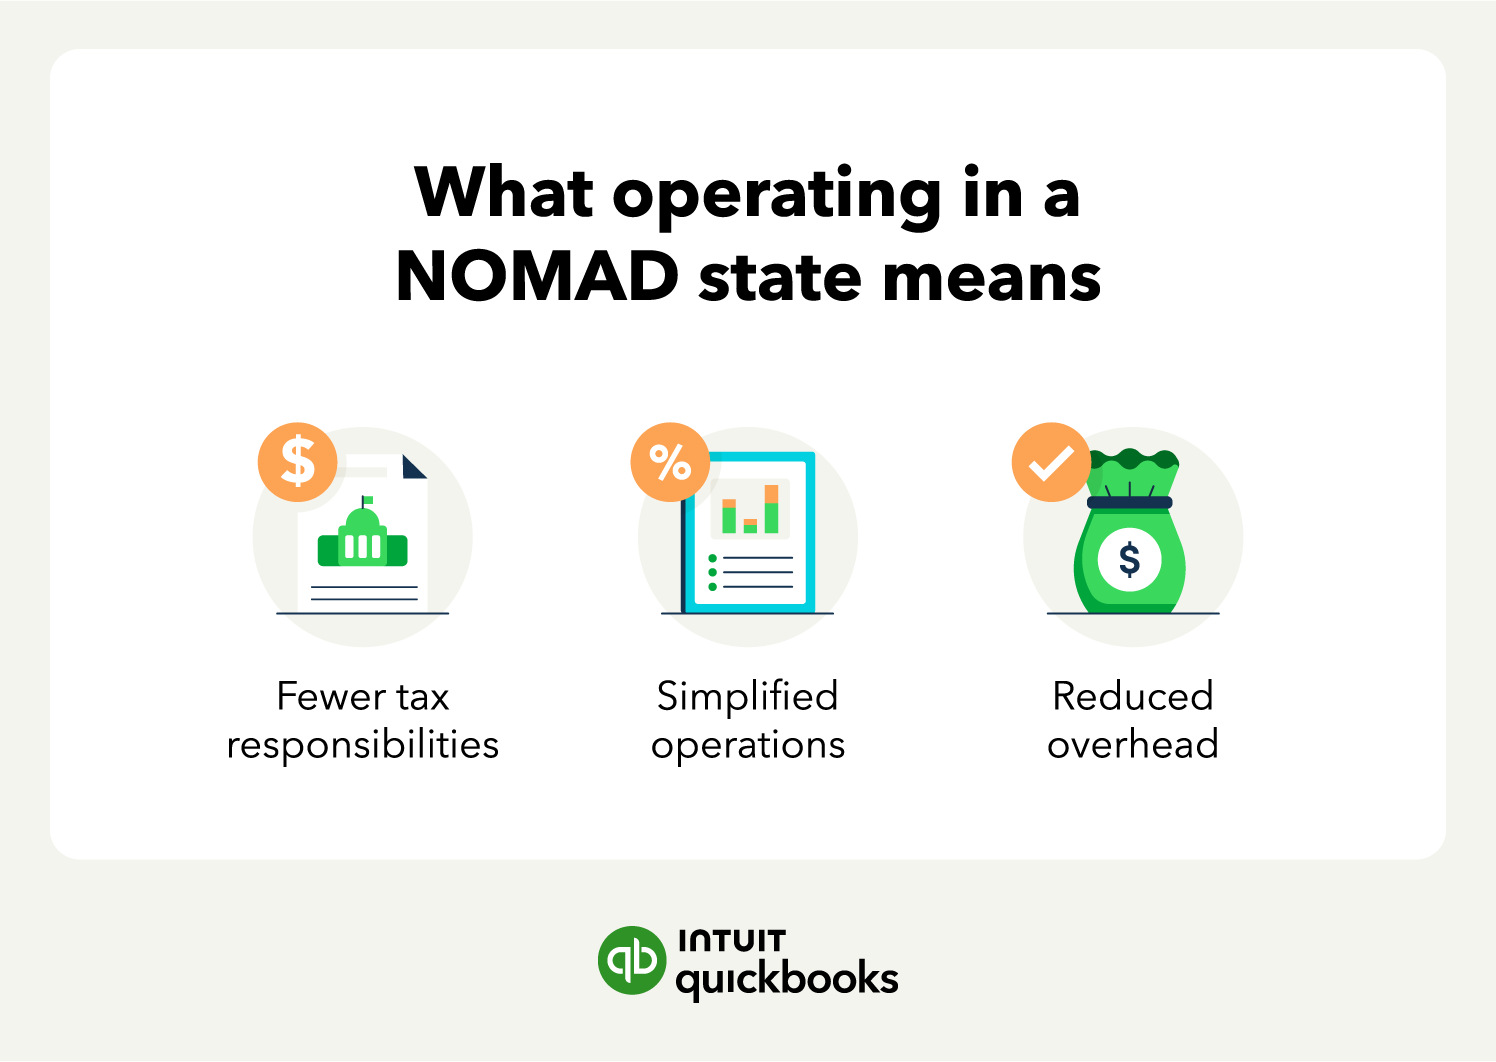 An illustration of of benefit of operating in NOMAD states without sales tax, including reduced overhead.